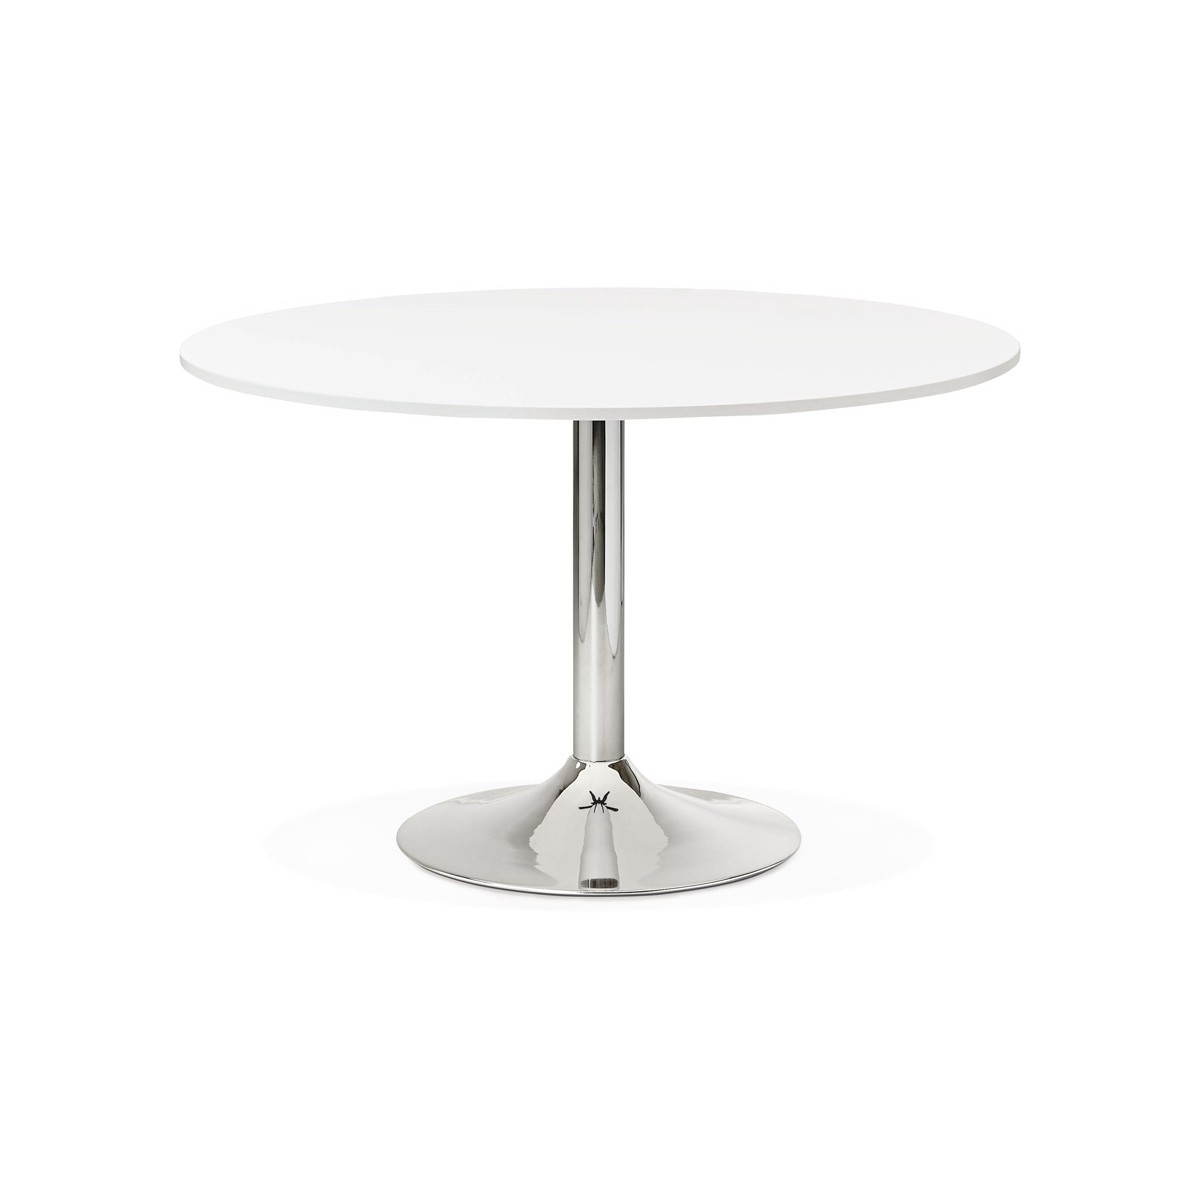 Office table or round design meal ASTA in wood and metal chrome (Ø 120 cm)  (white) - AMP Story 4023